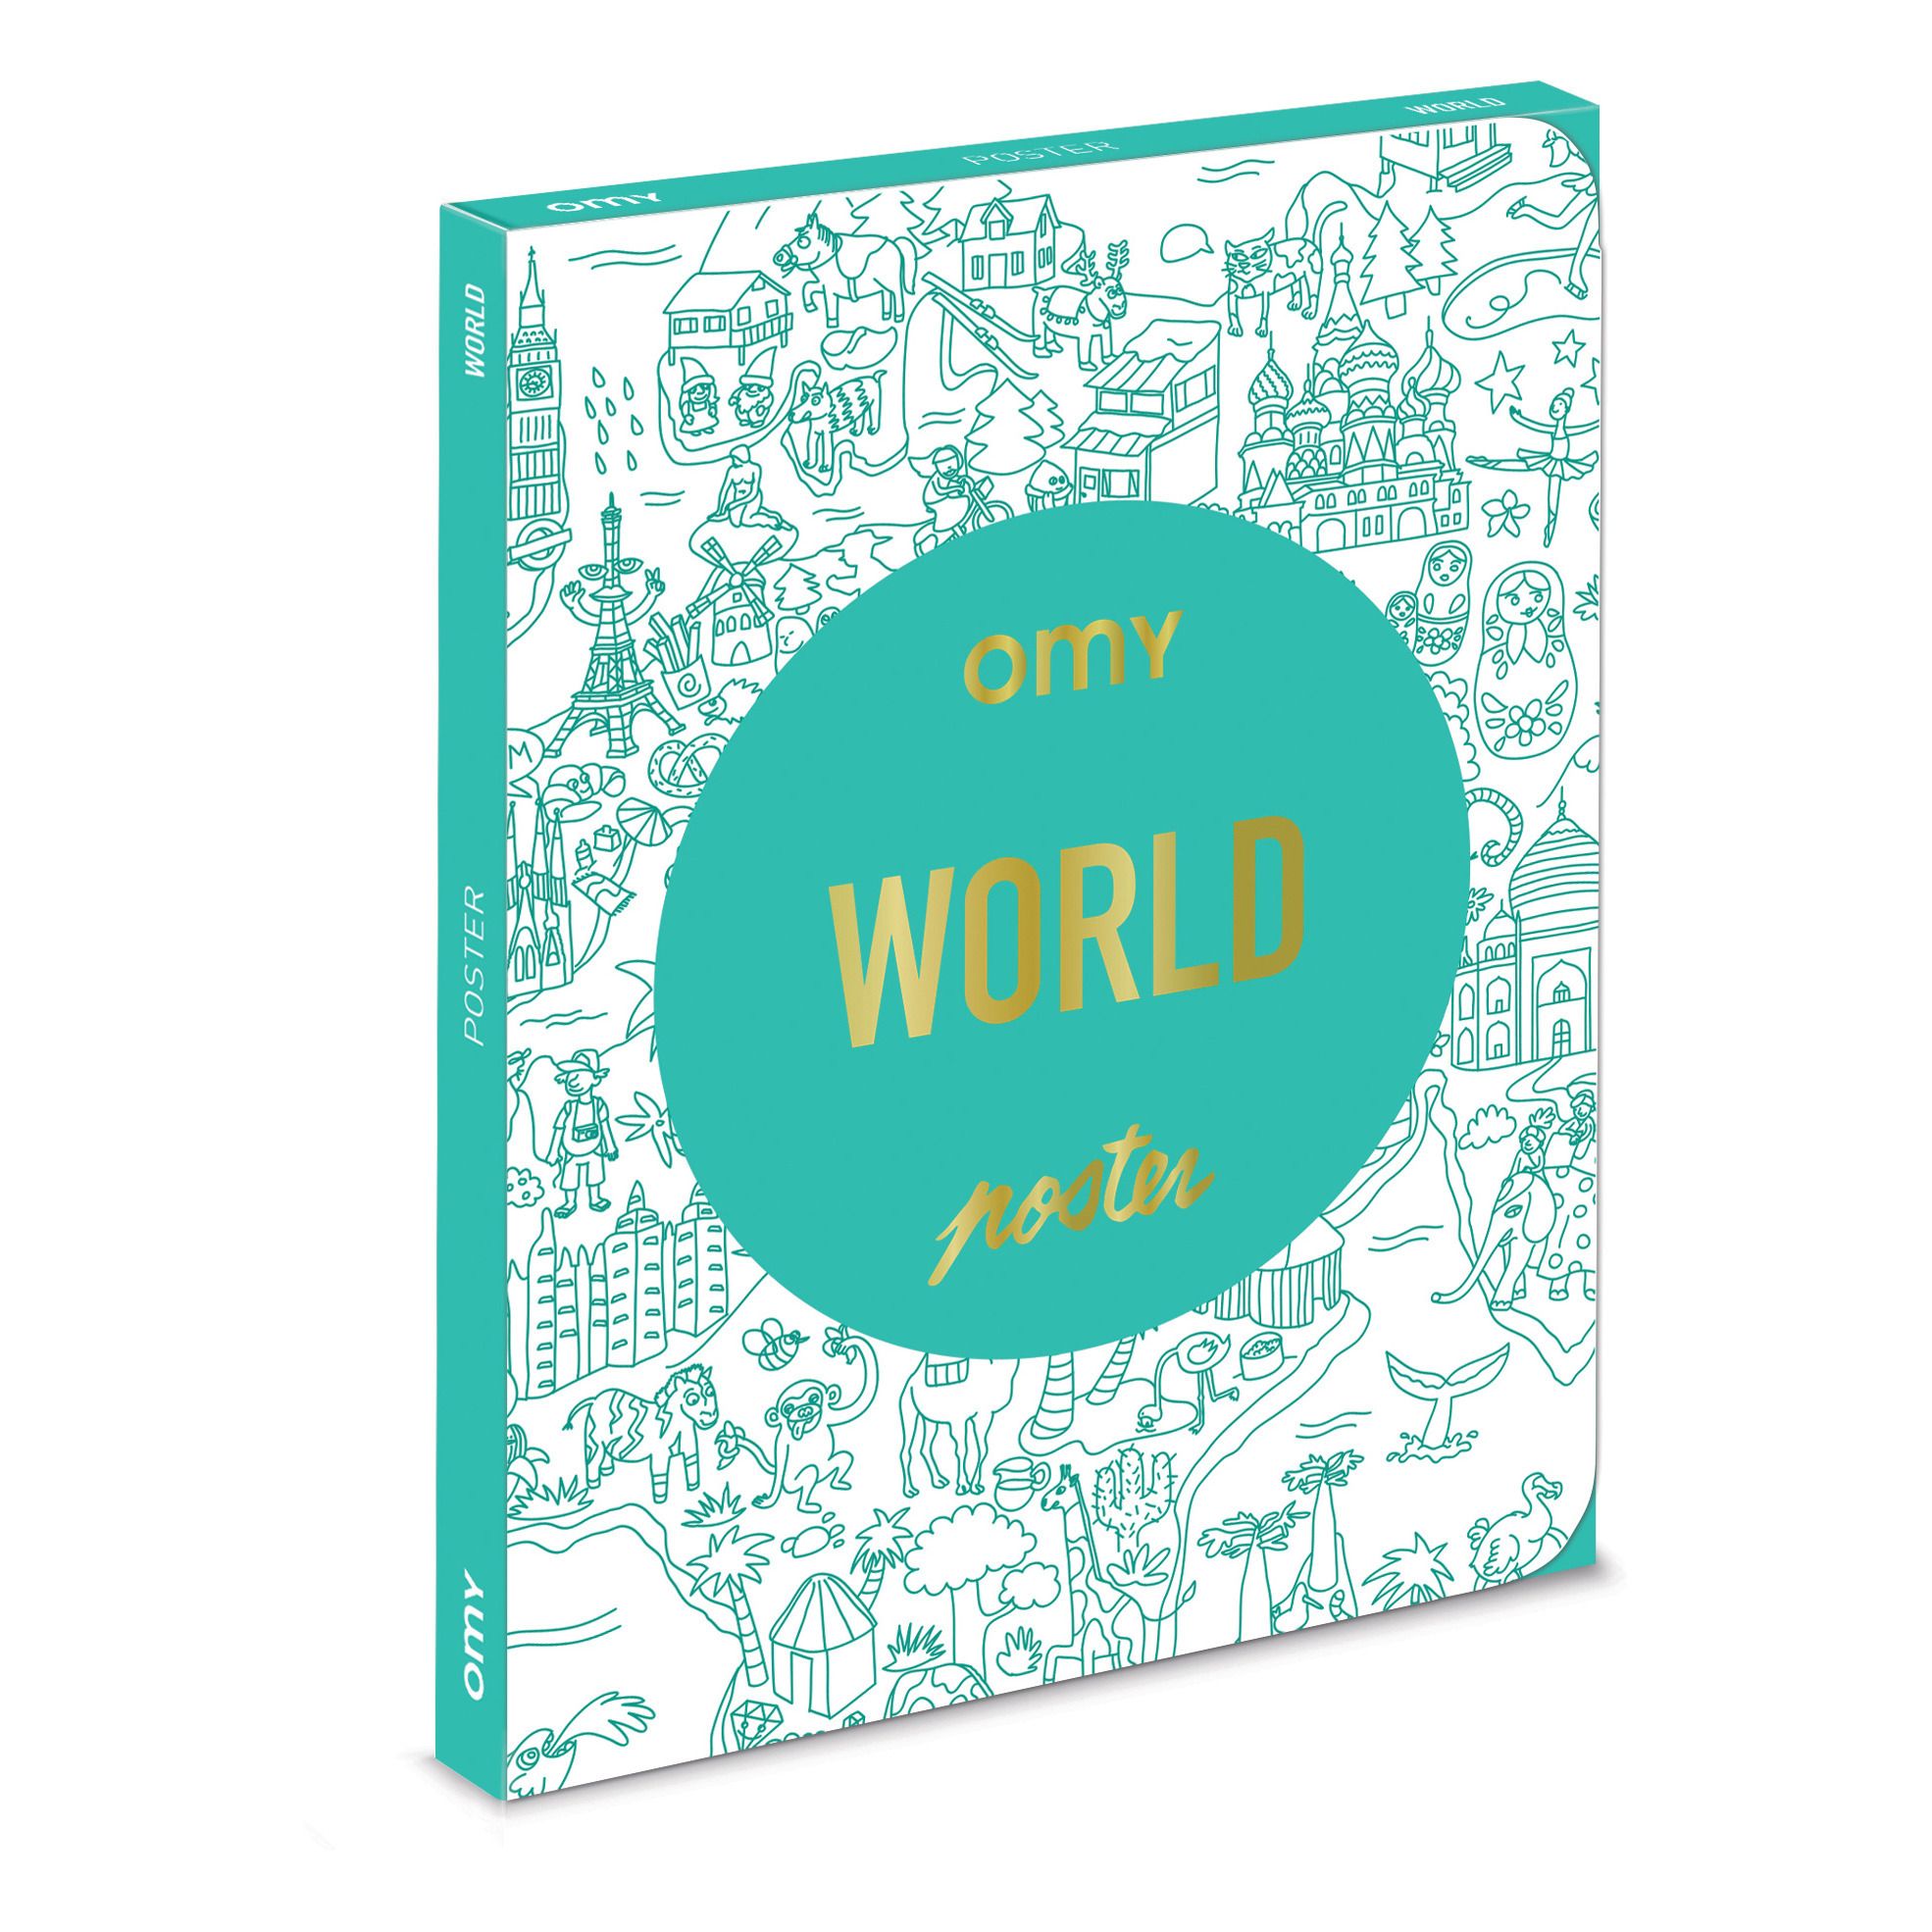 Omy - Poster Pocket World - Multicolore